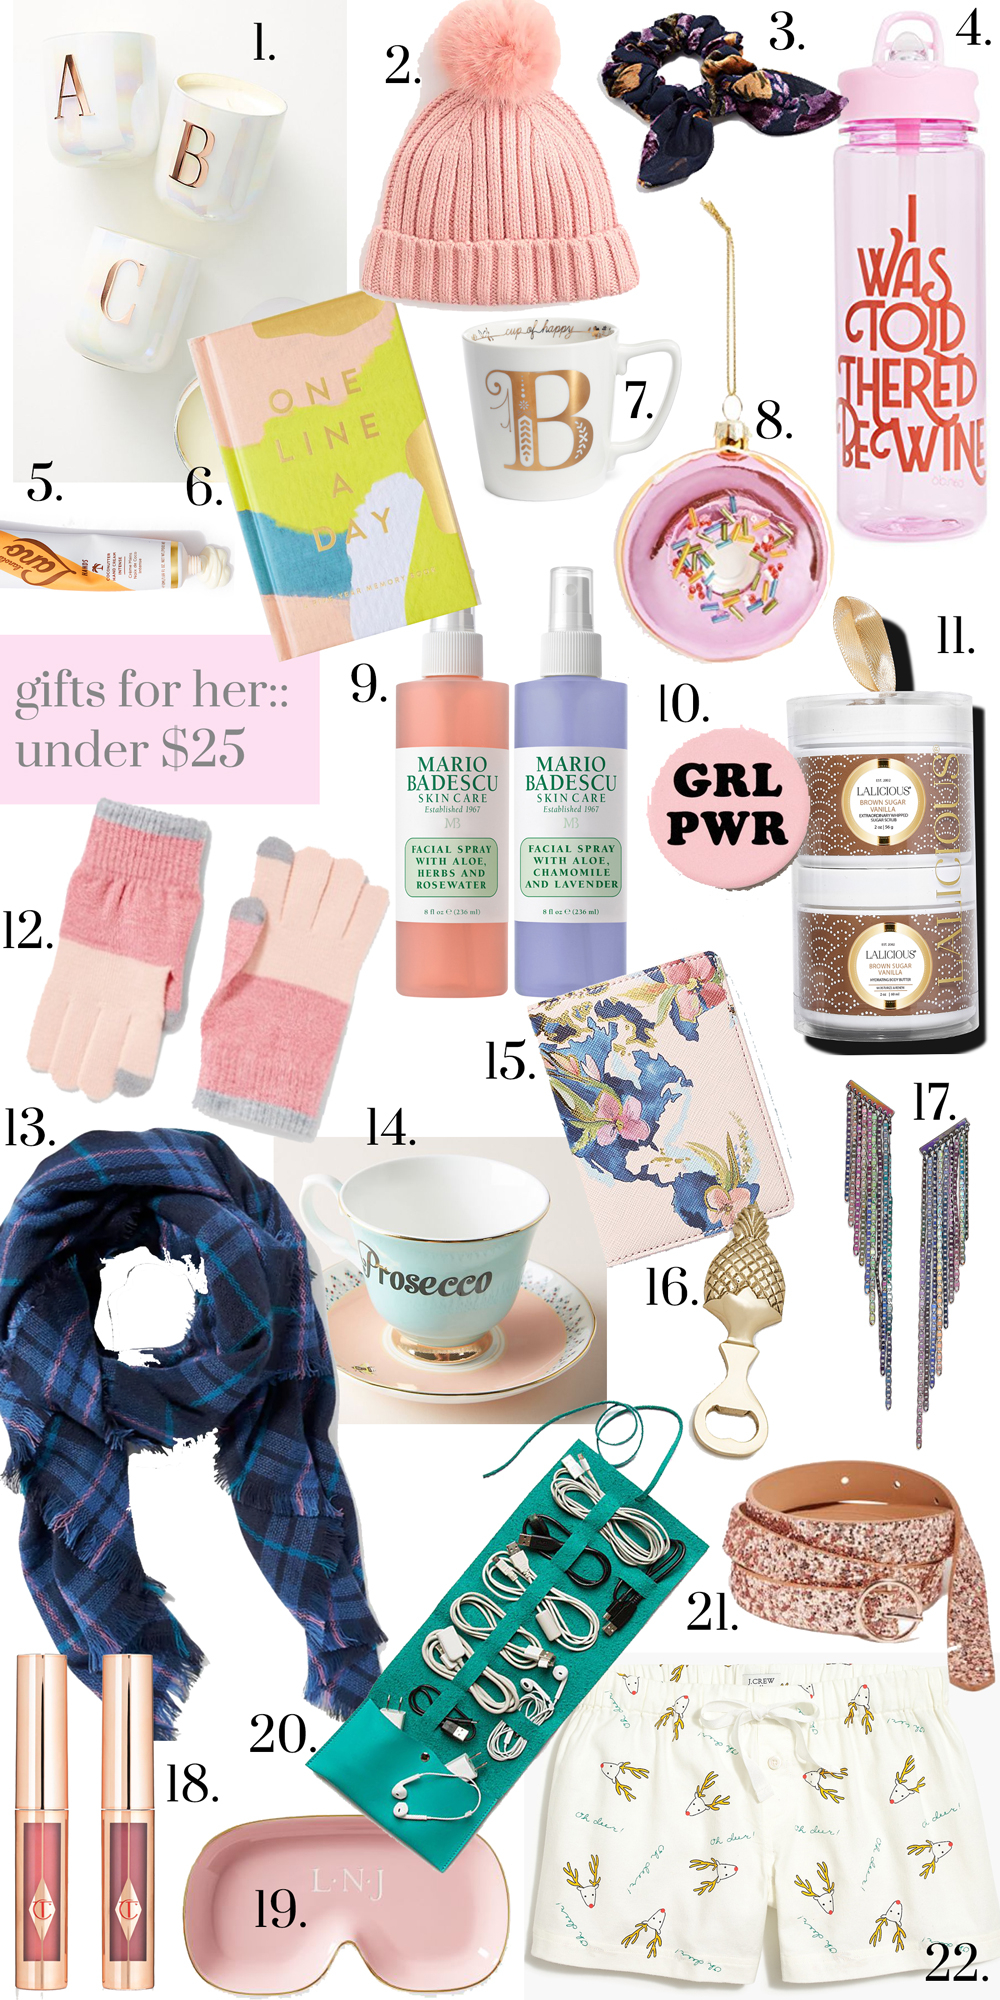 25 Gifts for $25 or Less! 